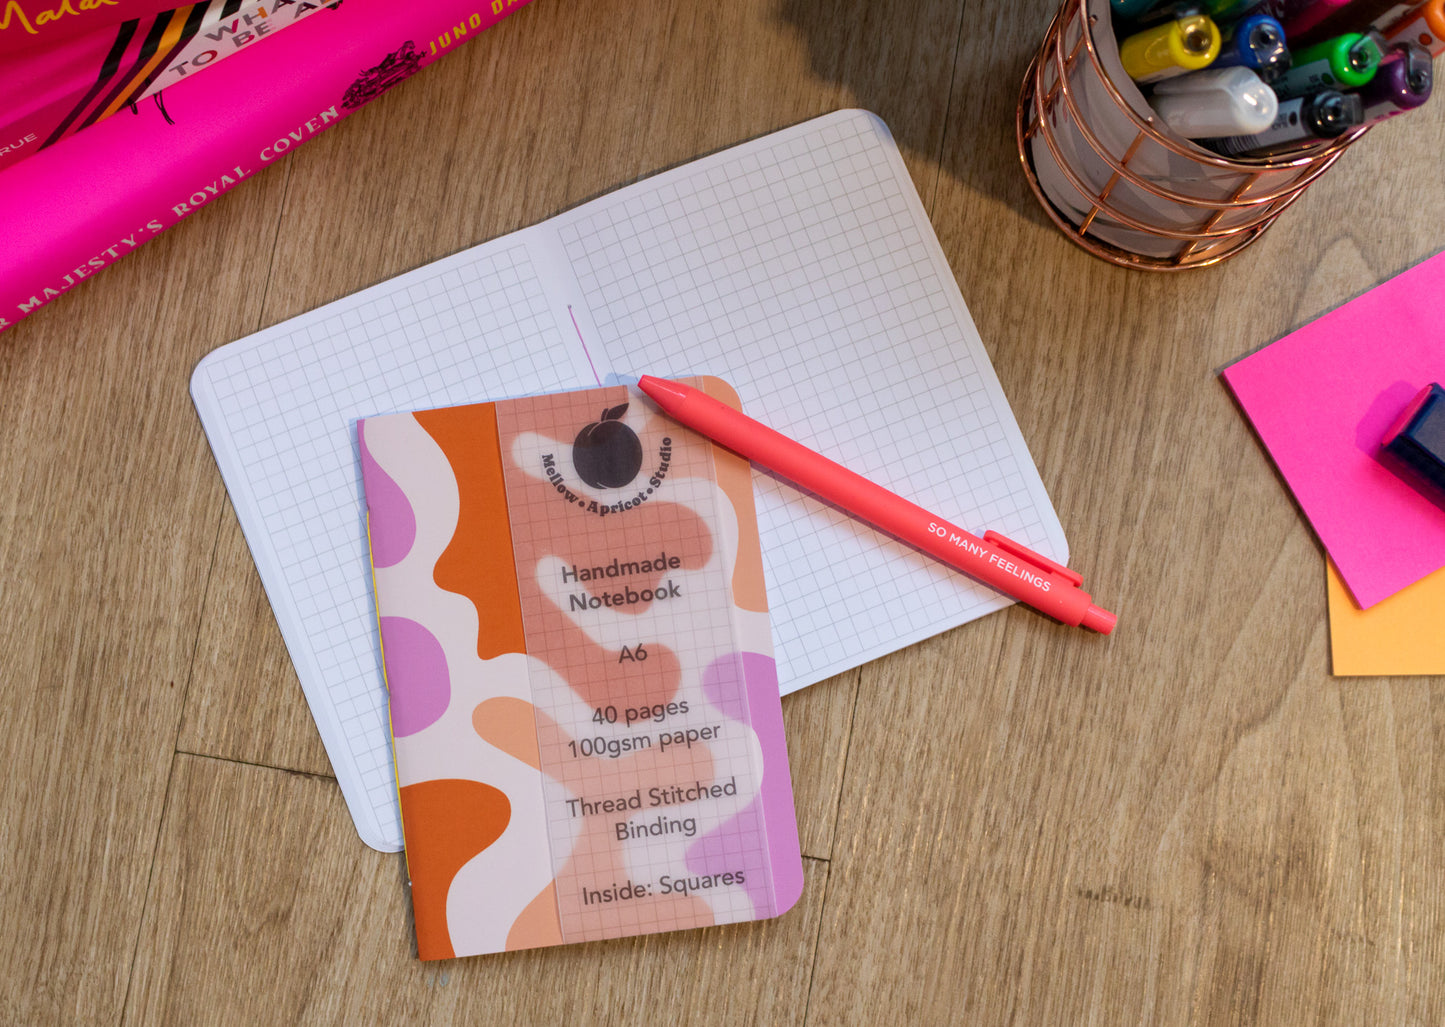 A6 Handmade Notebook with Abstract Design